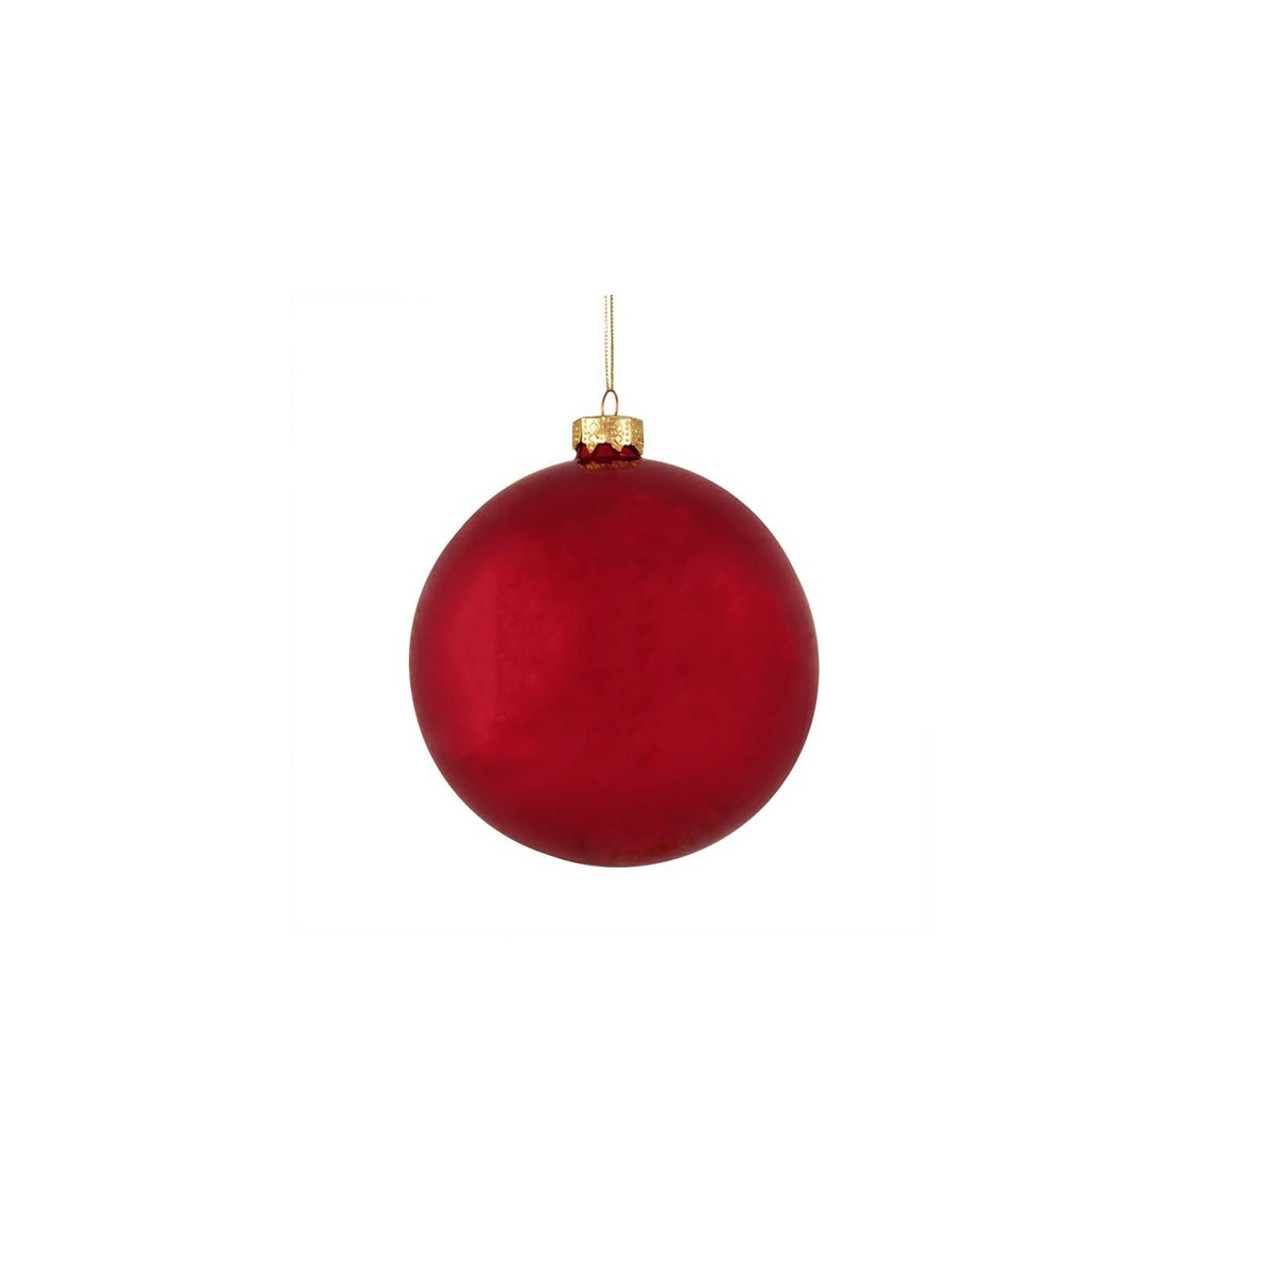 Whitehurst 6ct Clear Frost Glass Ball Christmas Ornaments 4 (100mm)